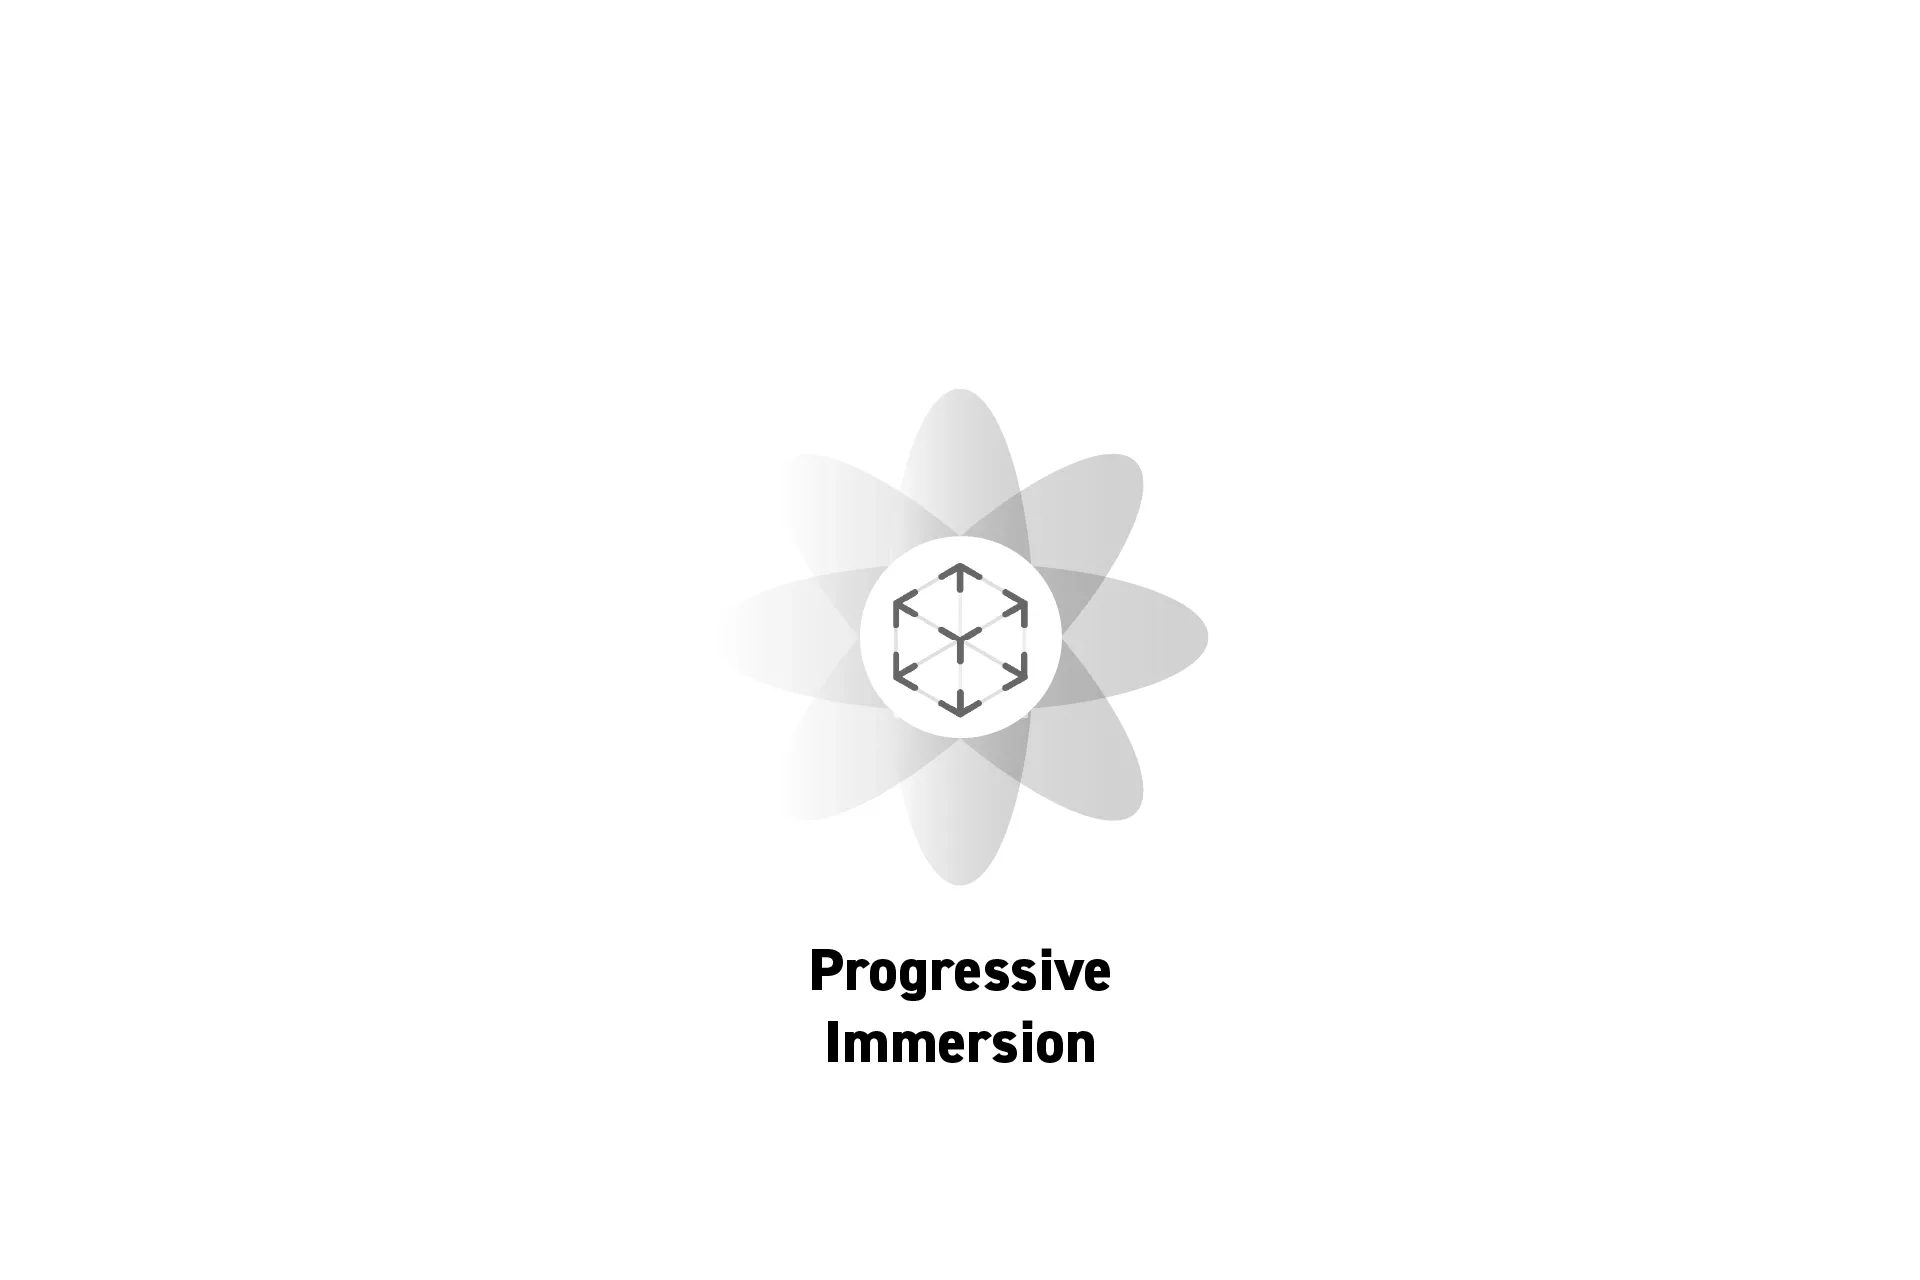 A flower that represents spatial computing with the text "Progressive Immersion" beneath it.